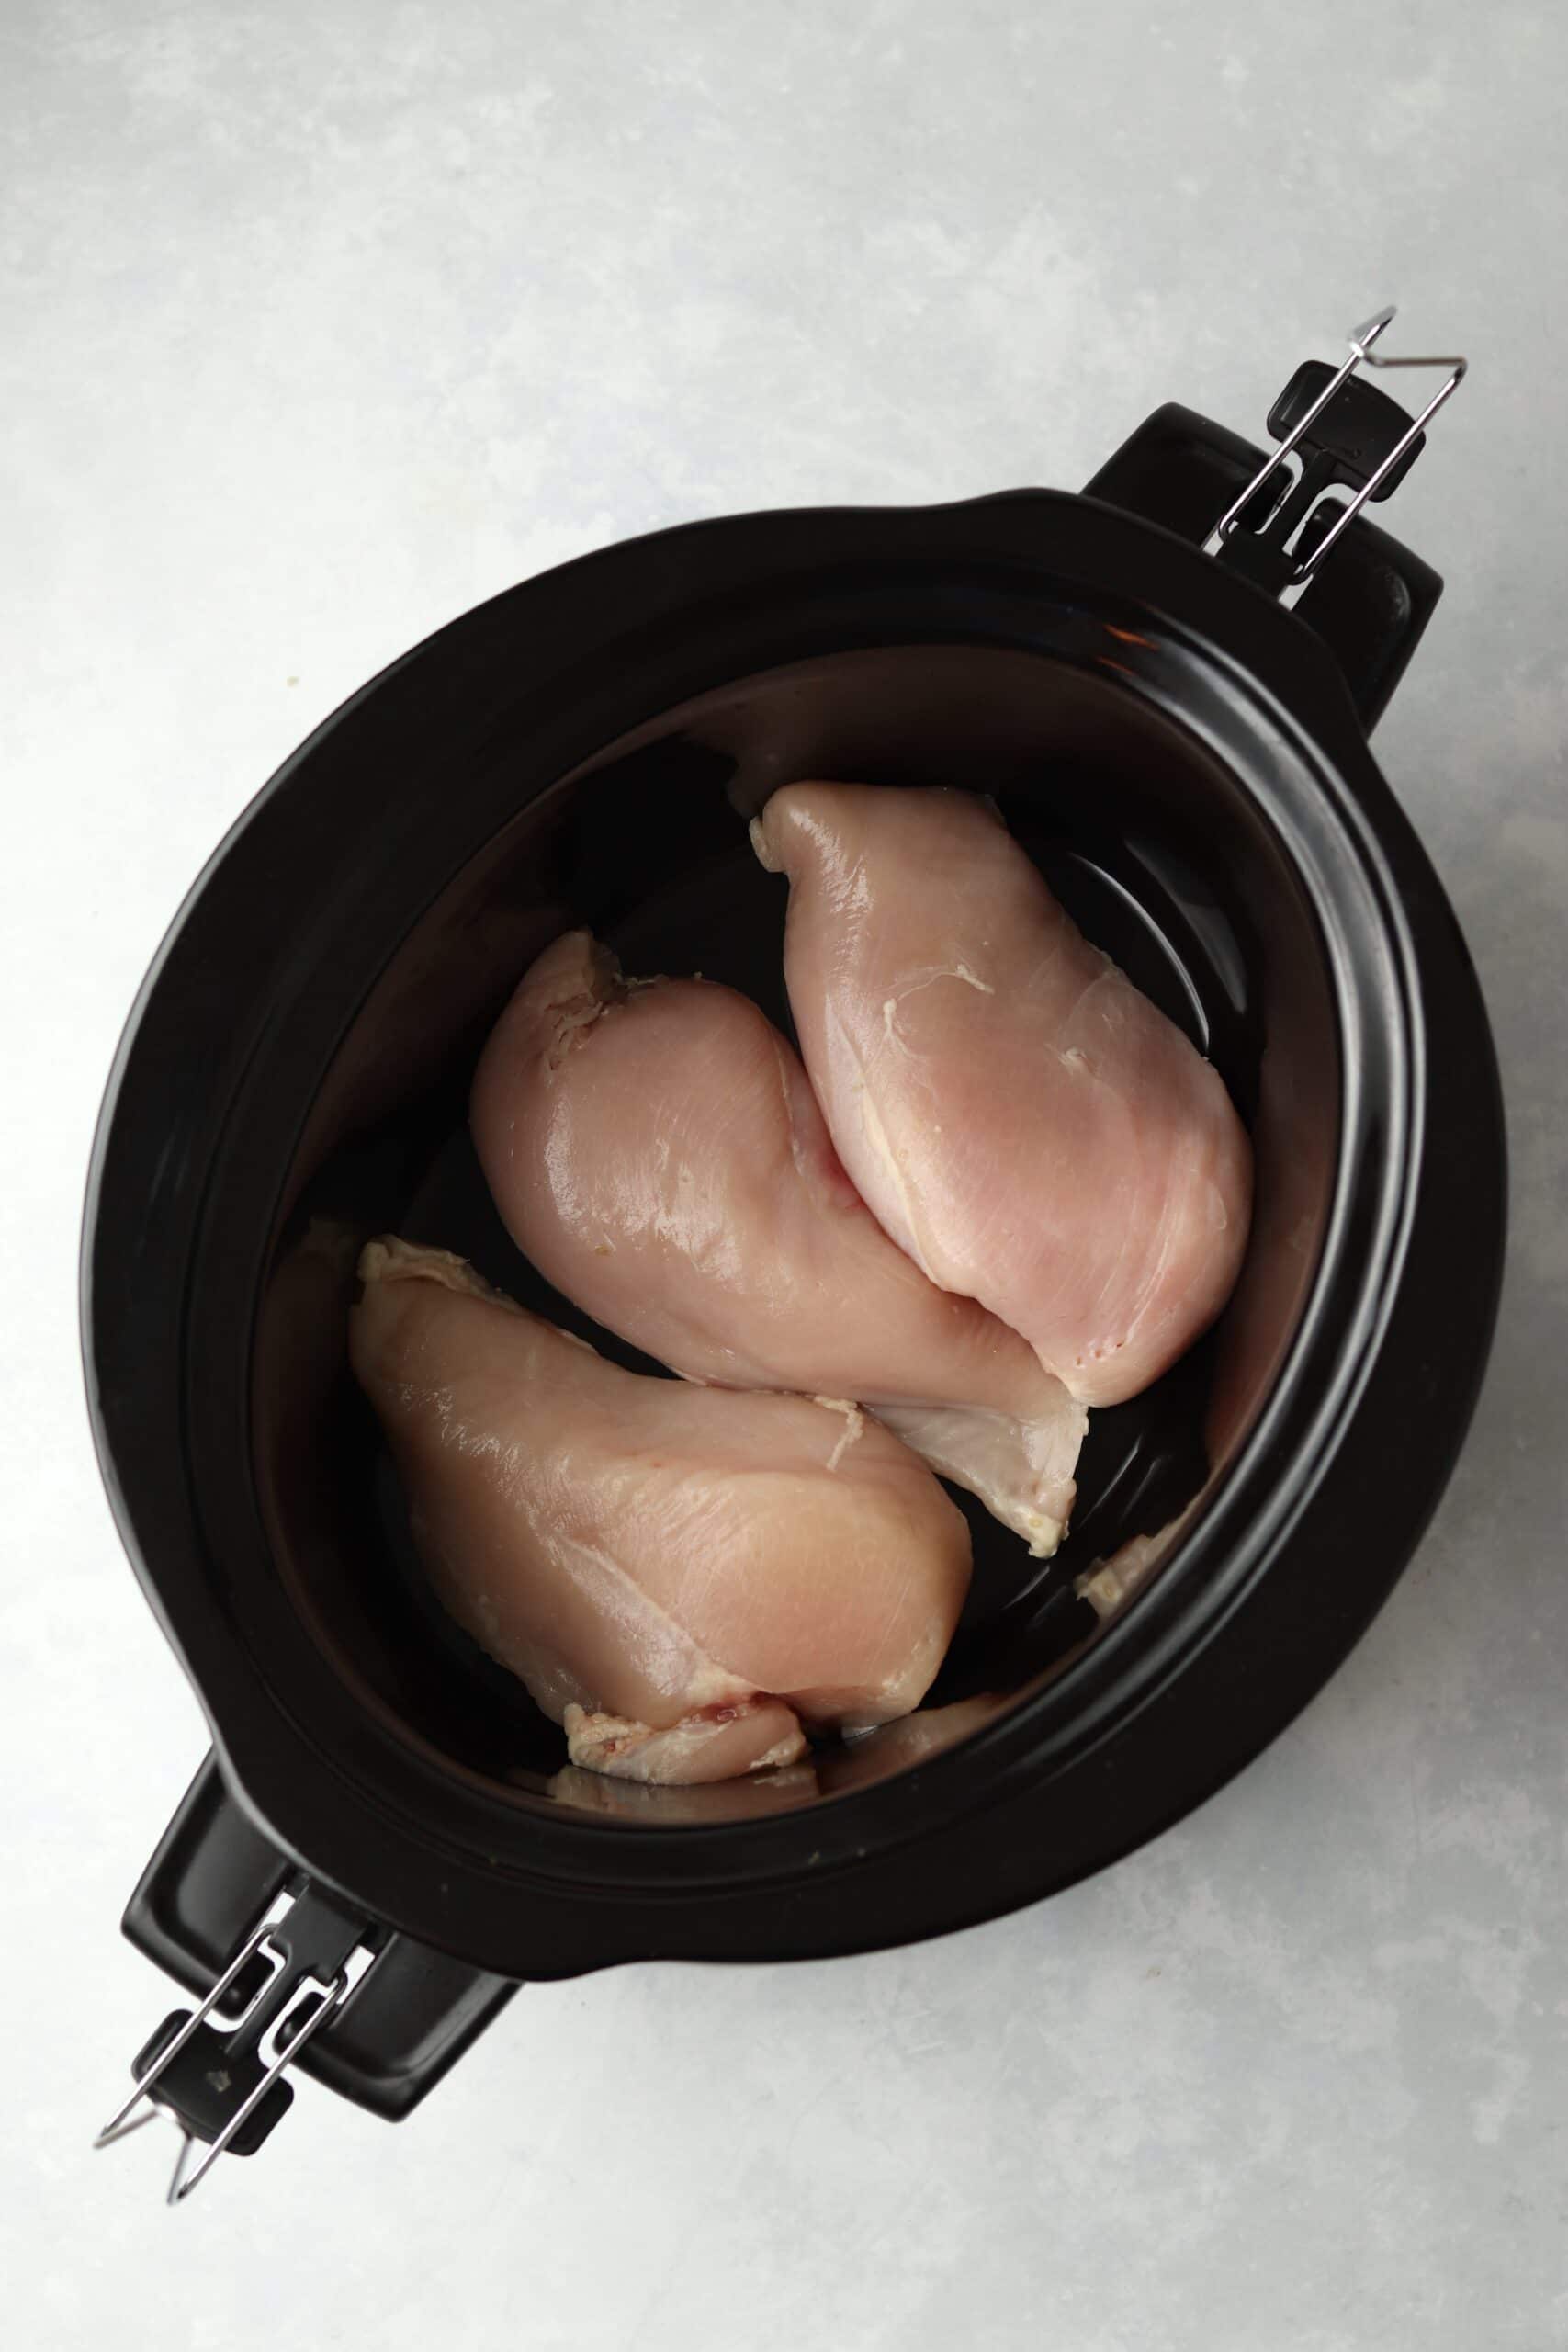 chicken breasts in slow cooker